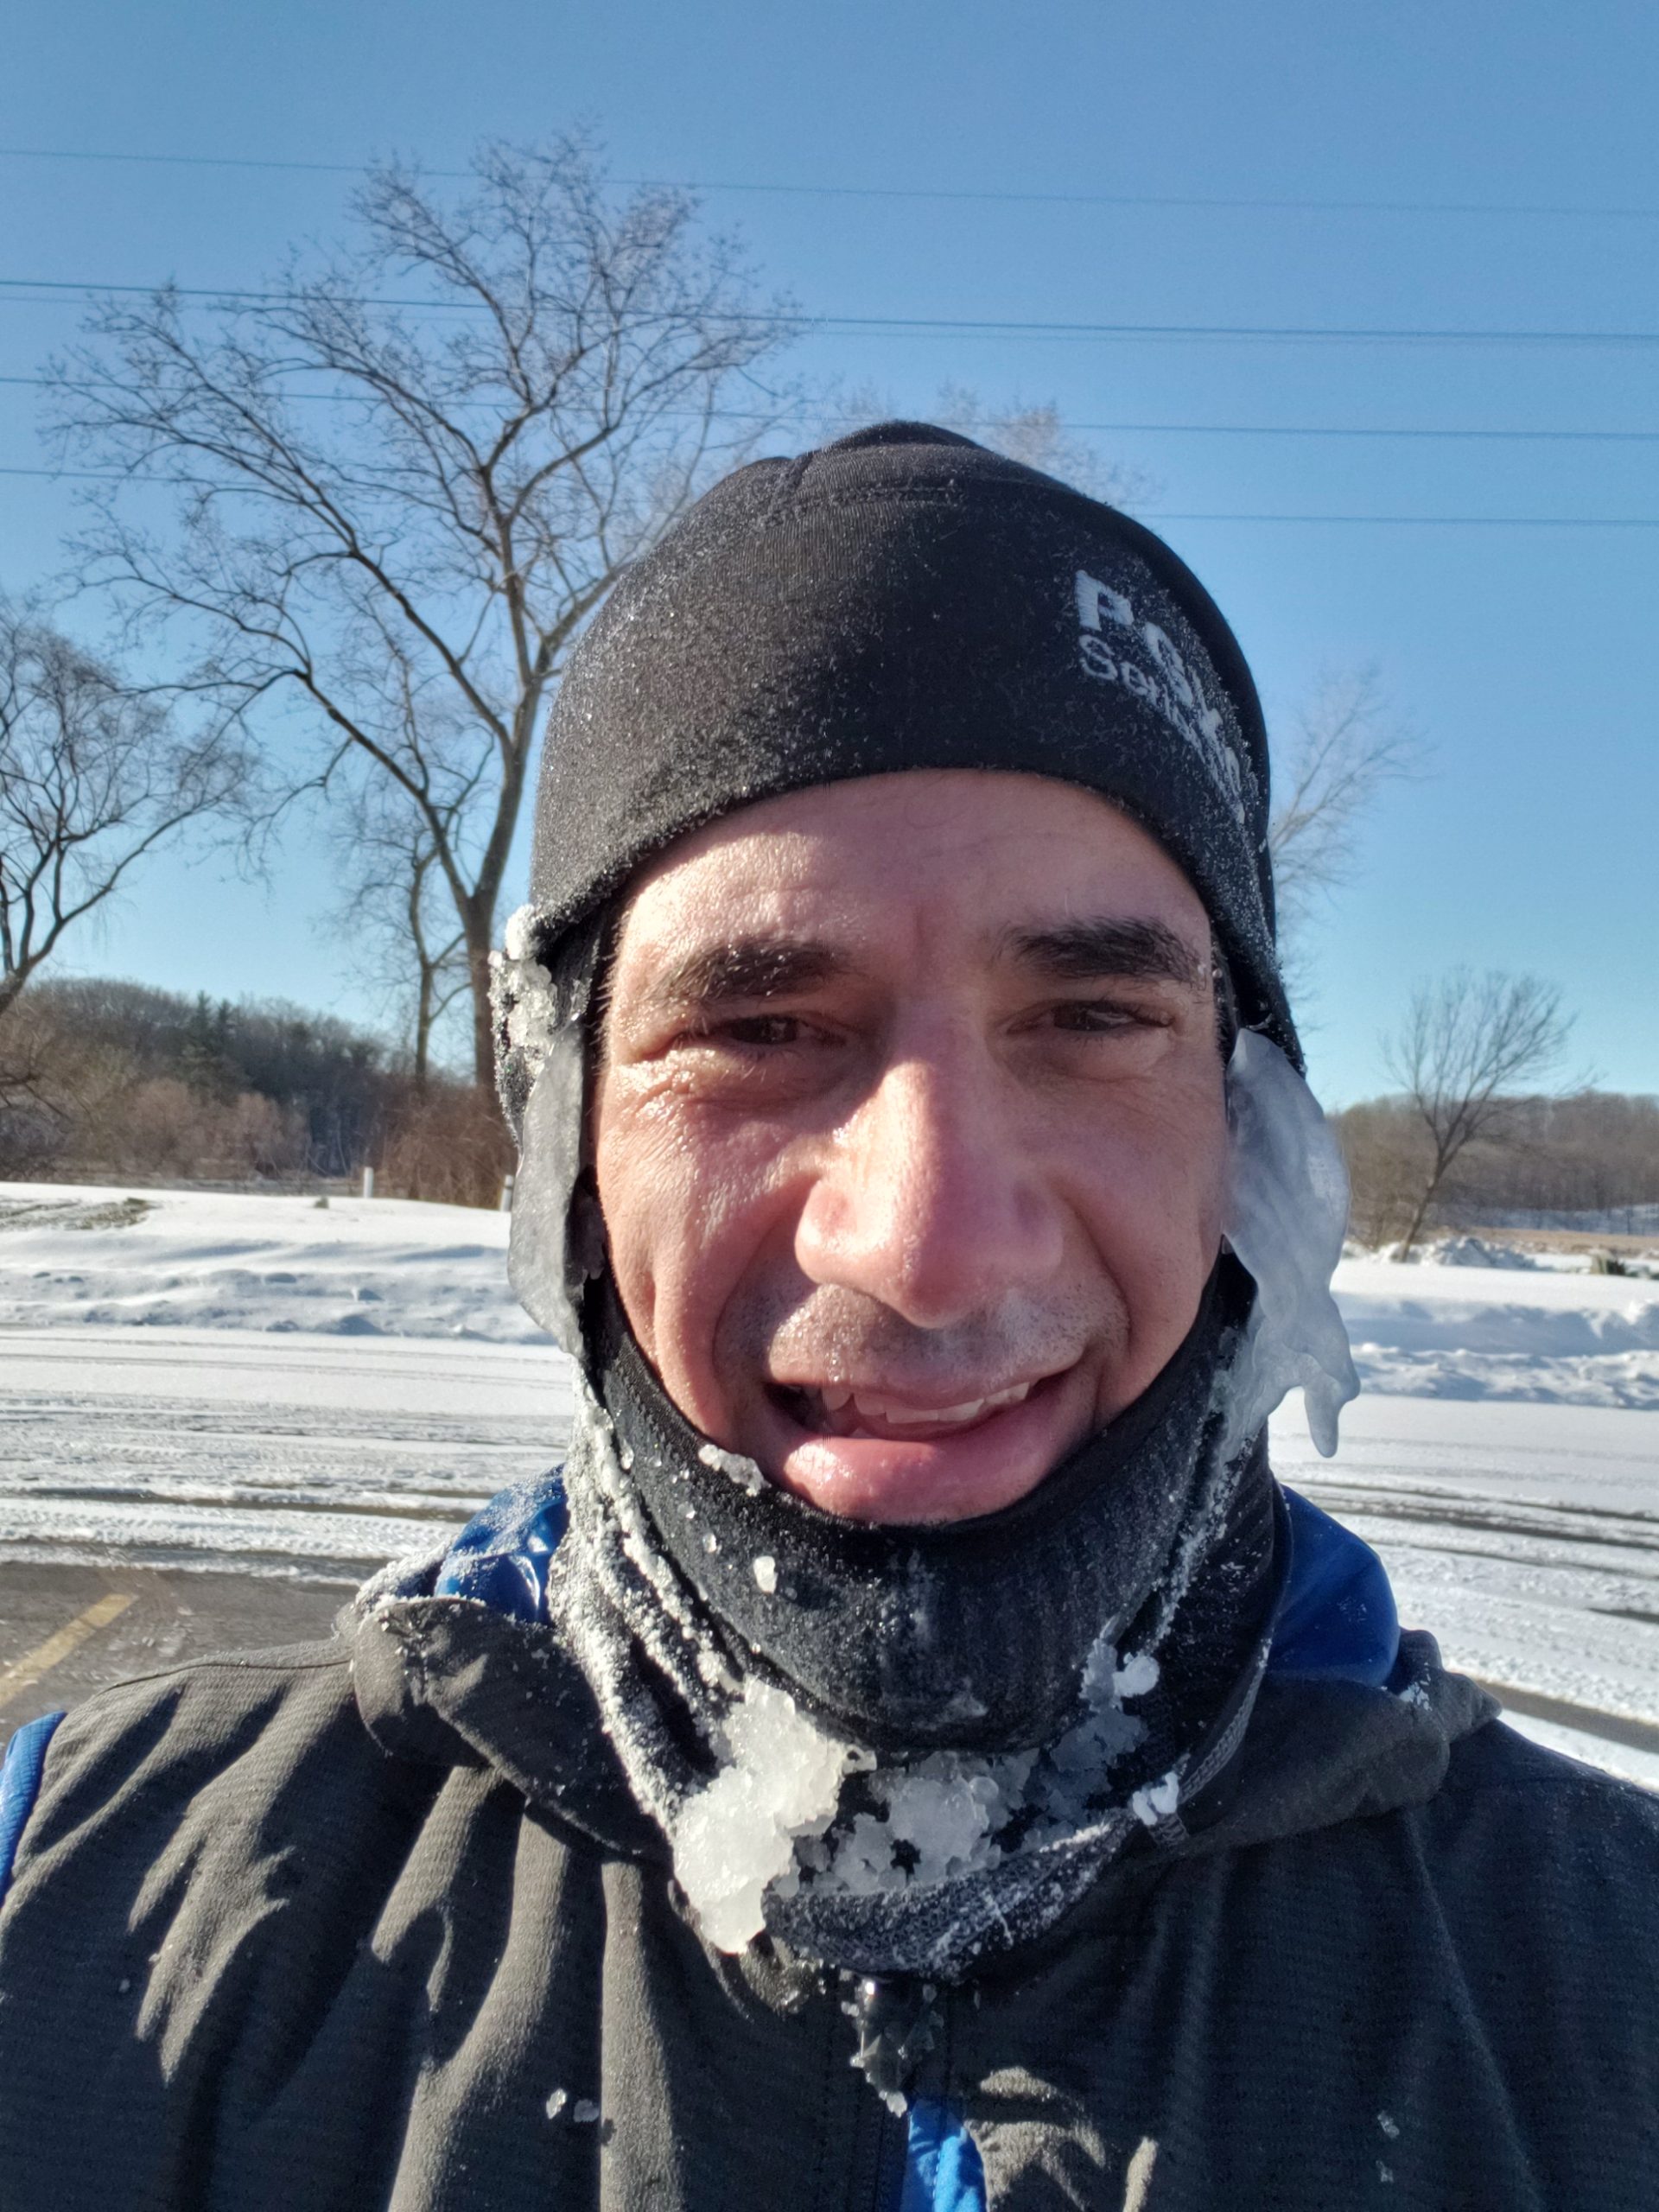 Sweat-cicles after 17 mile run around Irondequoit Bay in 3° temperatures